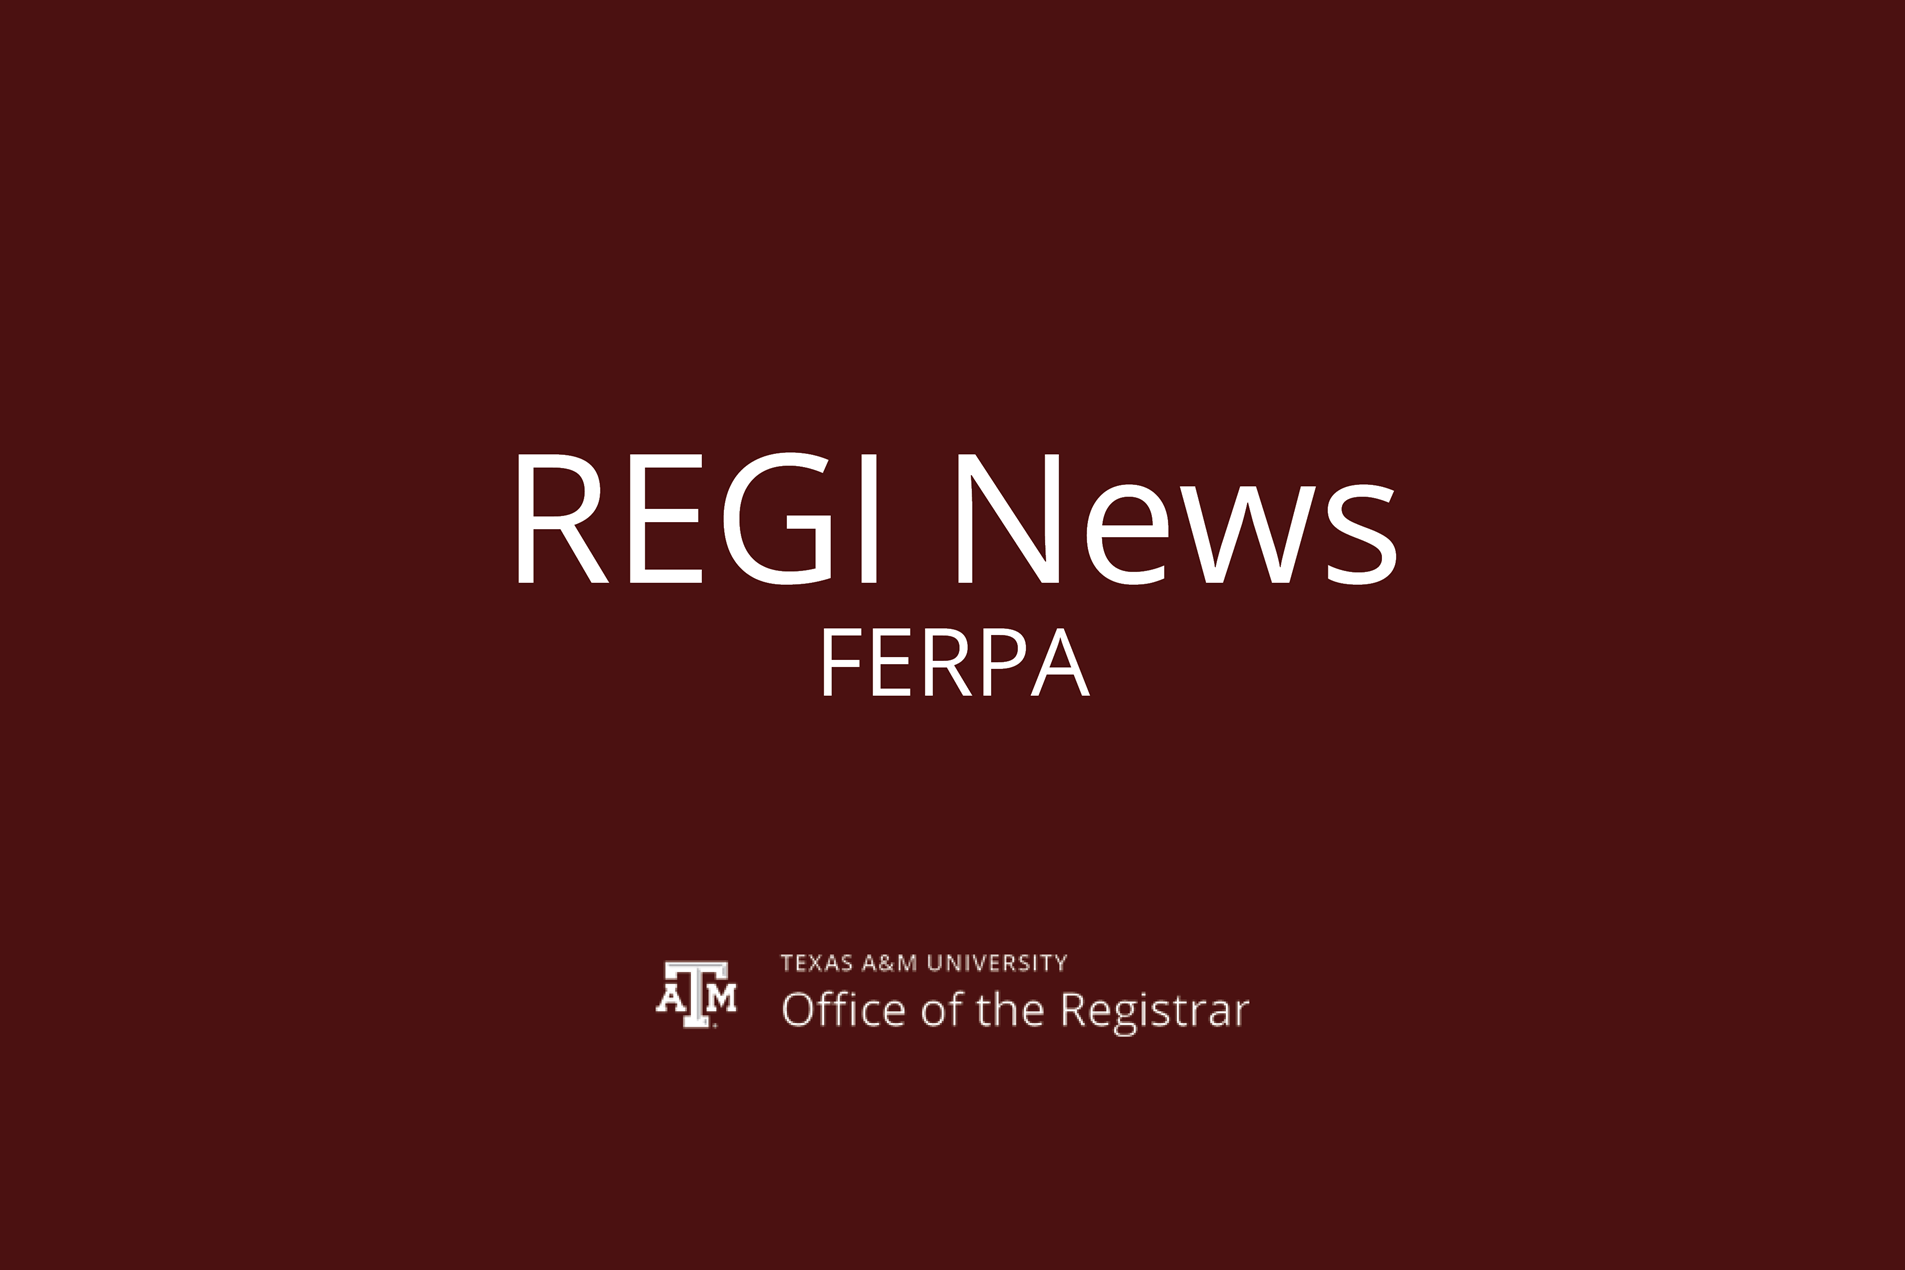 Friday Fun with FERPA, February 3, 2023 - Student Consent to Release Education Records